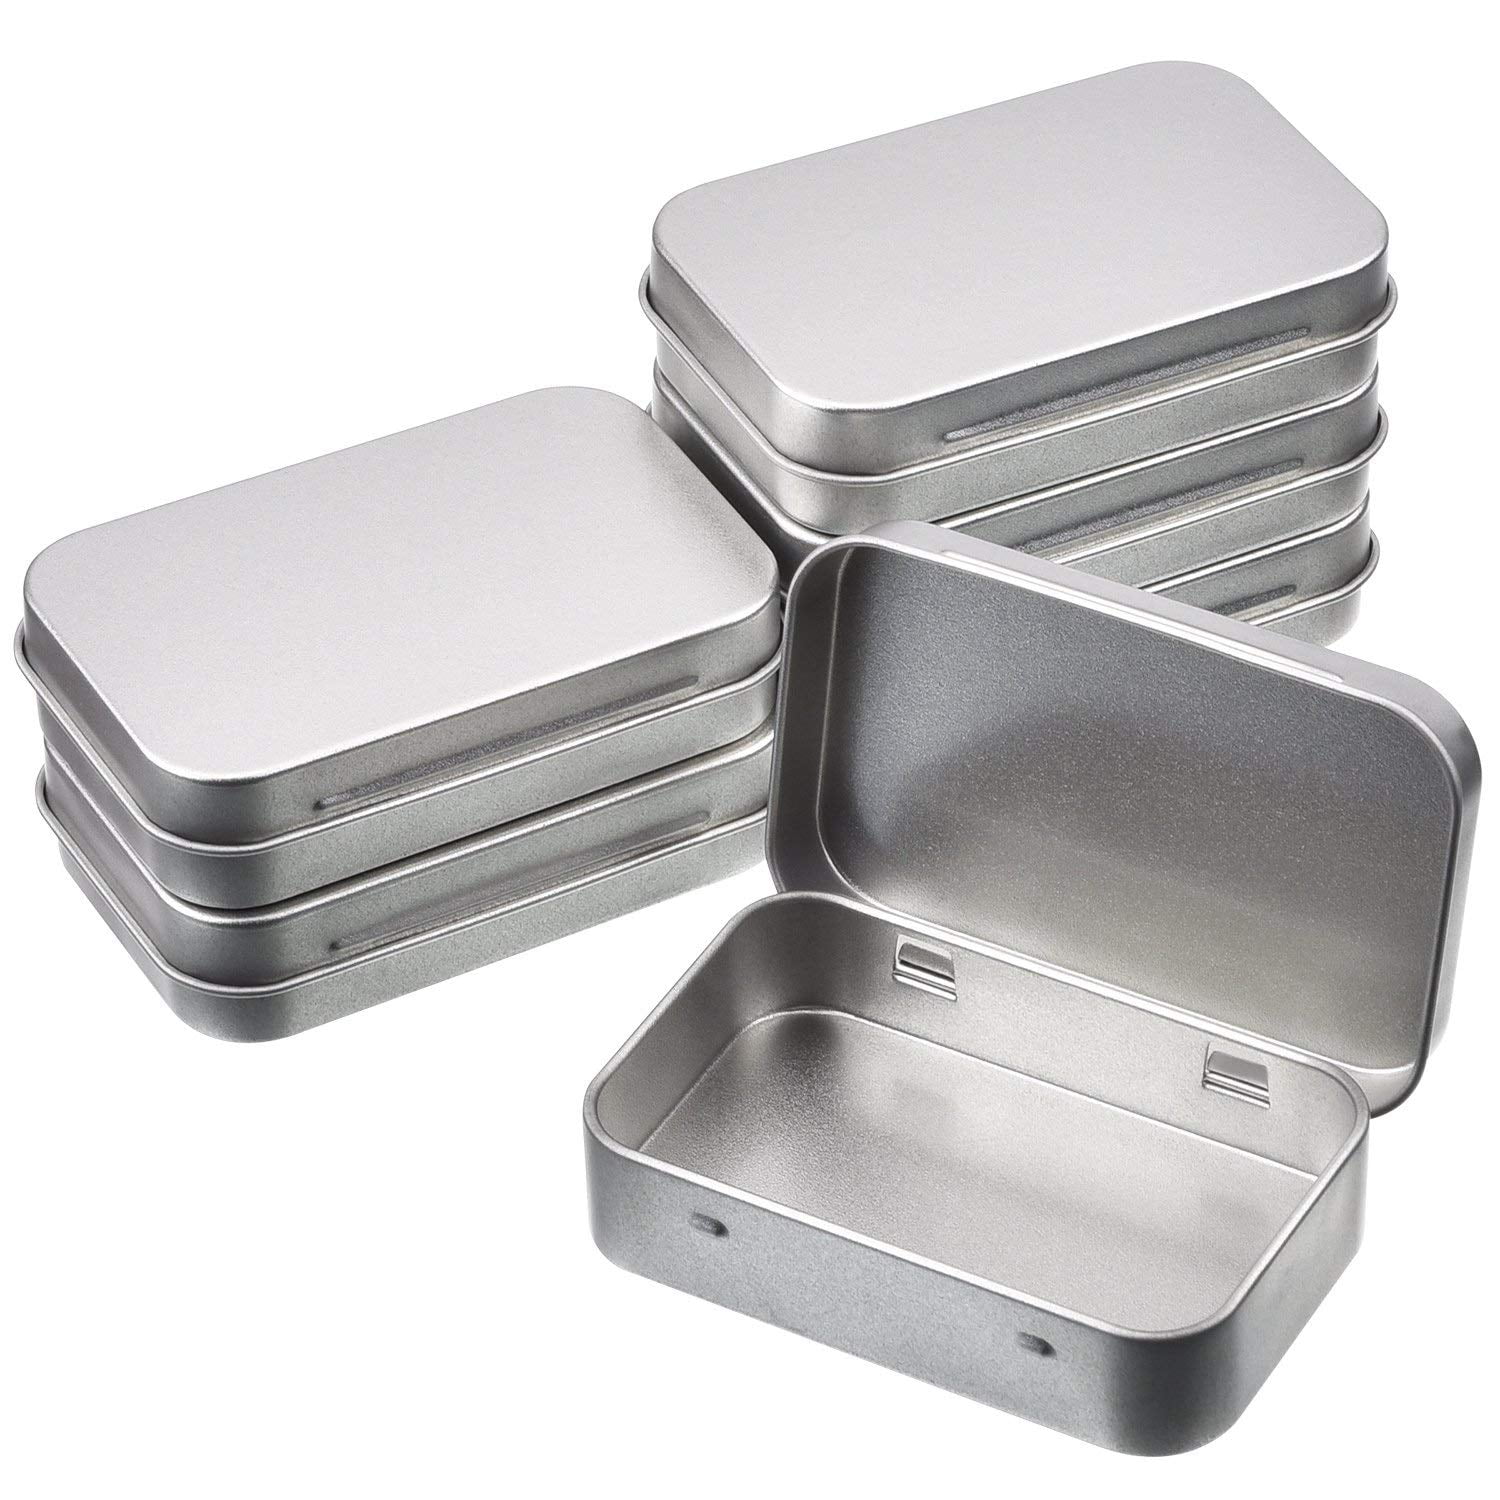 Jewellery SD Card Small Tins With Lid Small Storage Box Kit Metal Empty Mini Portable Tin Box For Small Gadget shuangmu 12PCS Metal Tins Set Coin 